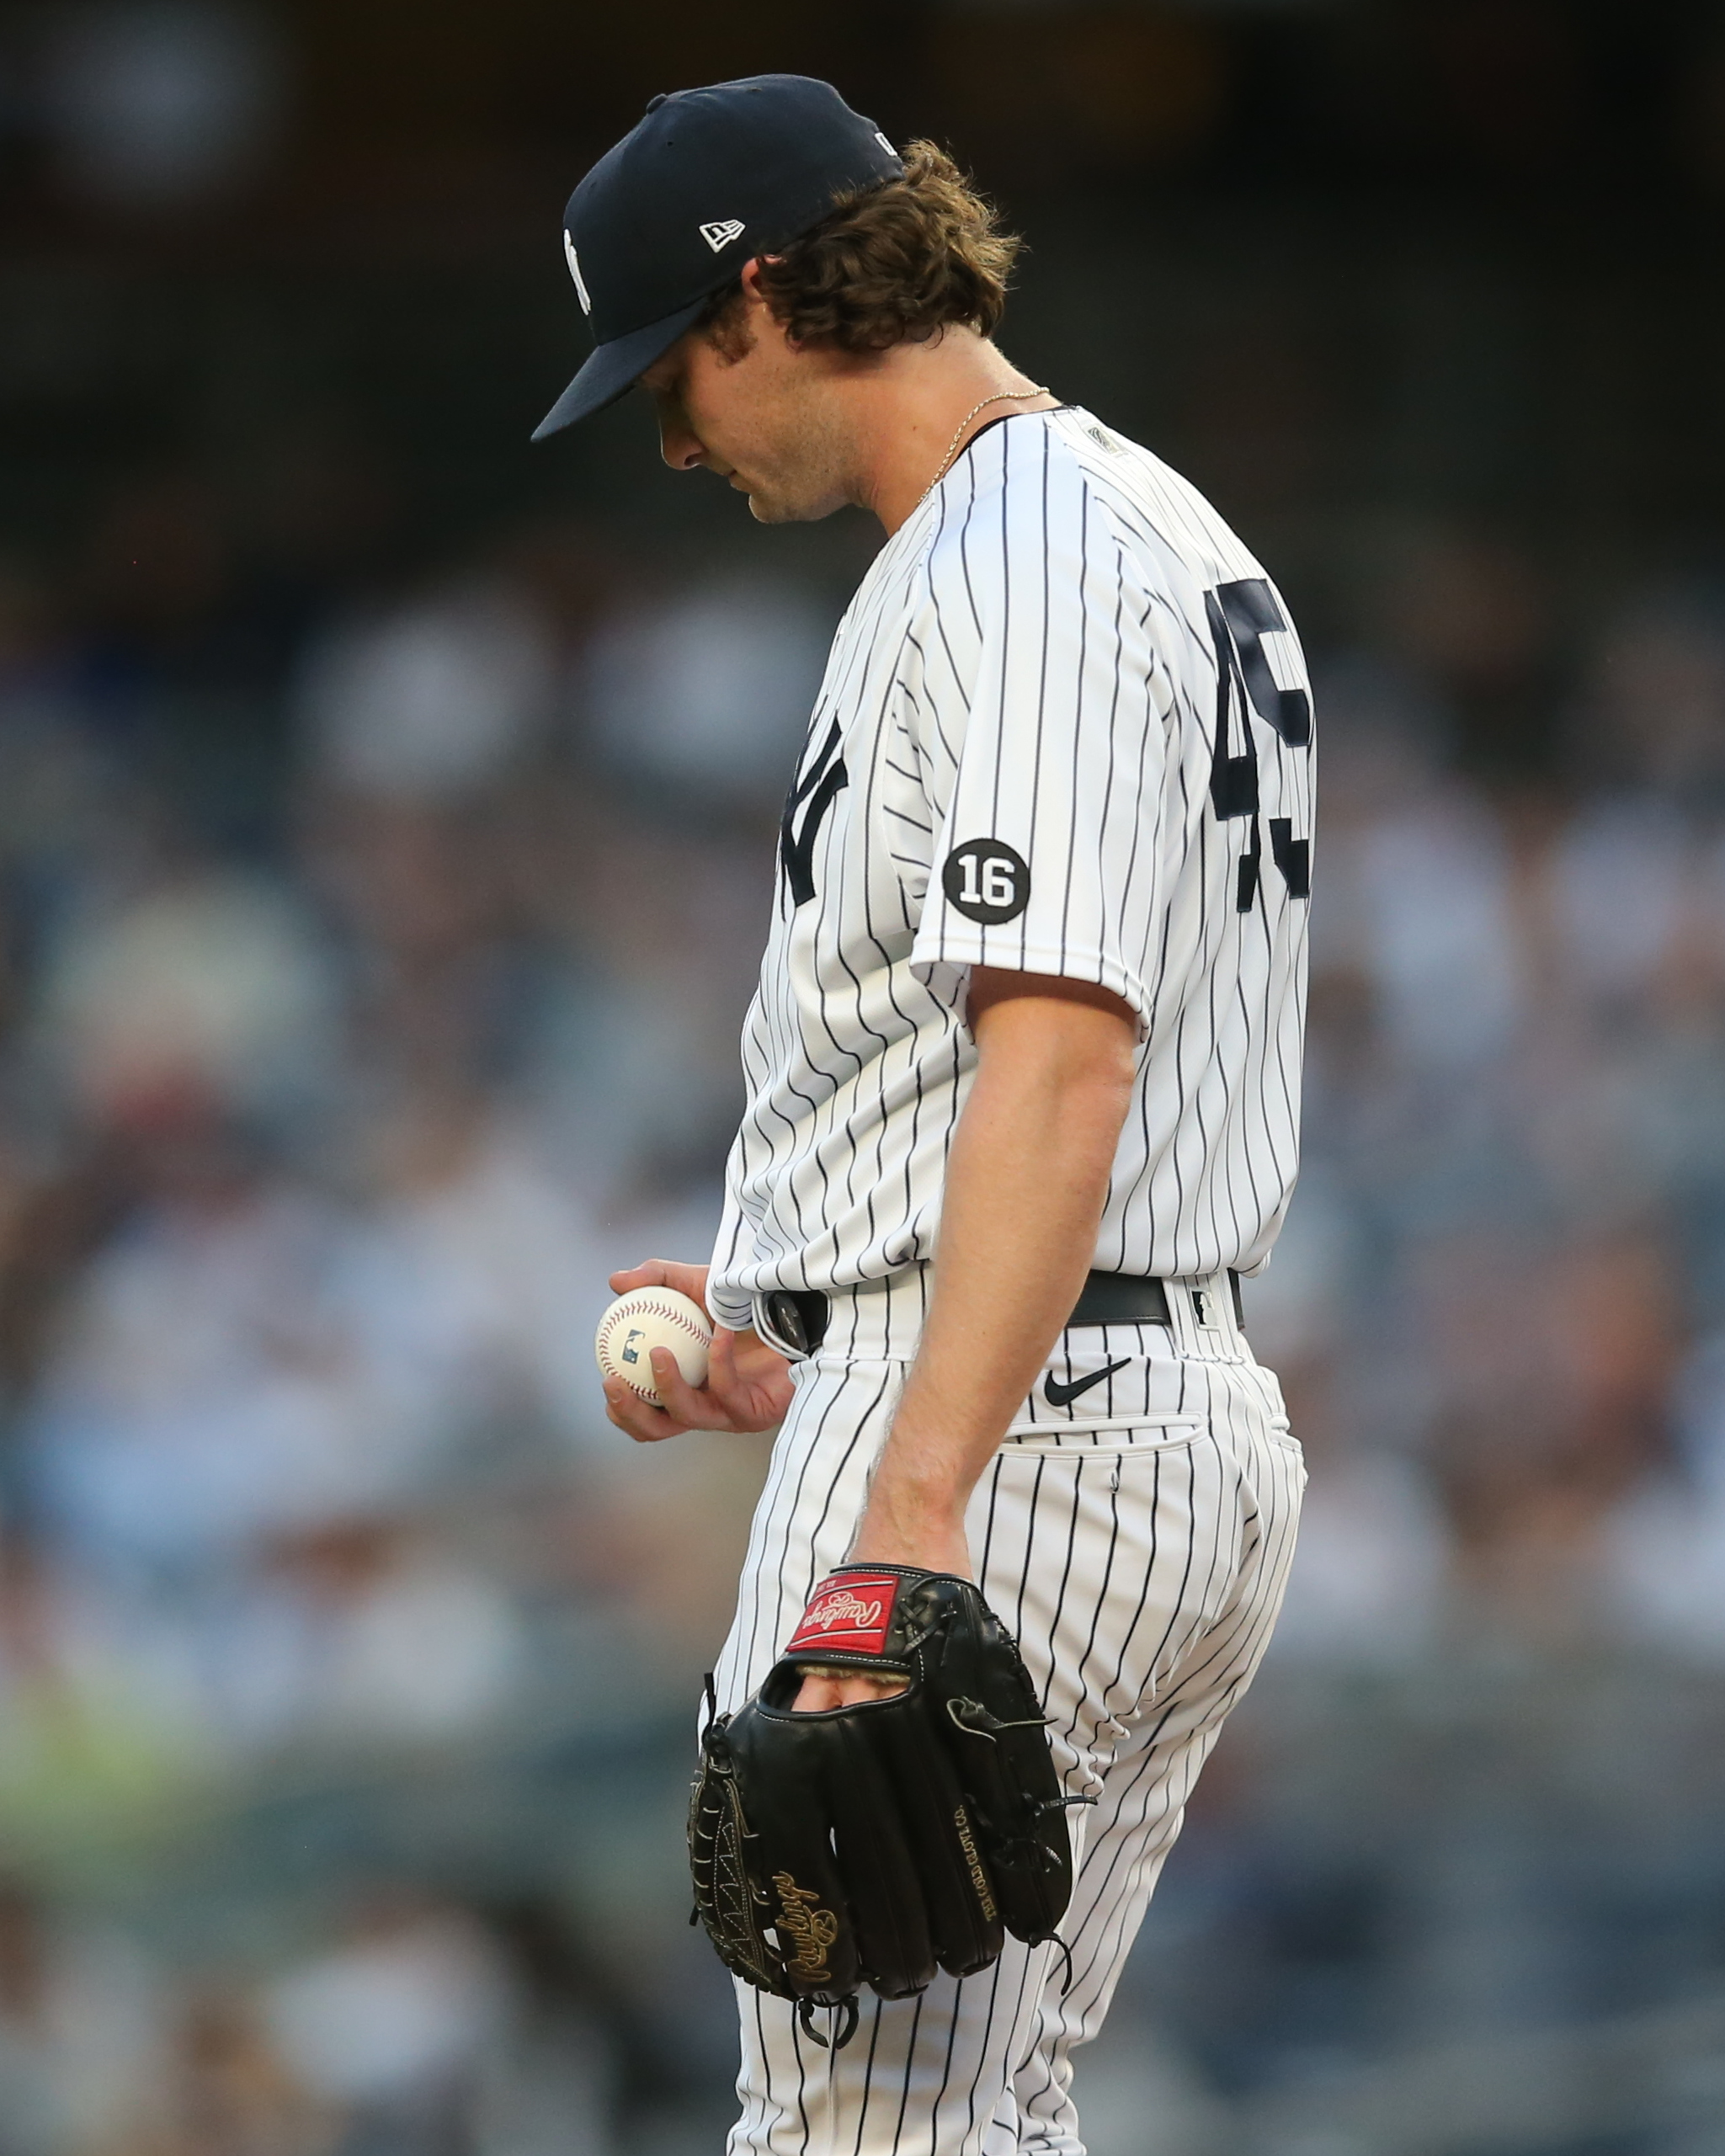 Yankees, White Sox lineups Monday  Gerrit Cole vs. Dylan Cease 